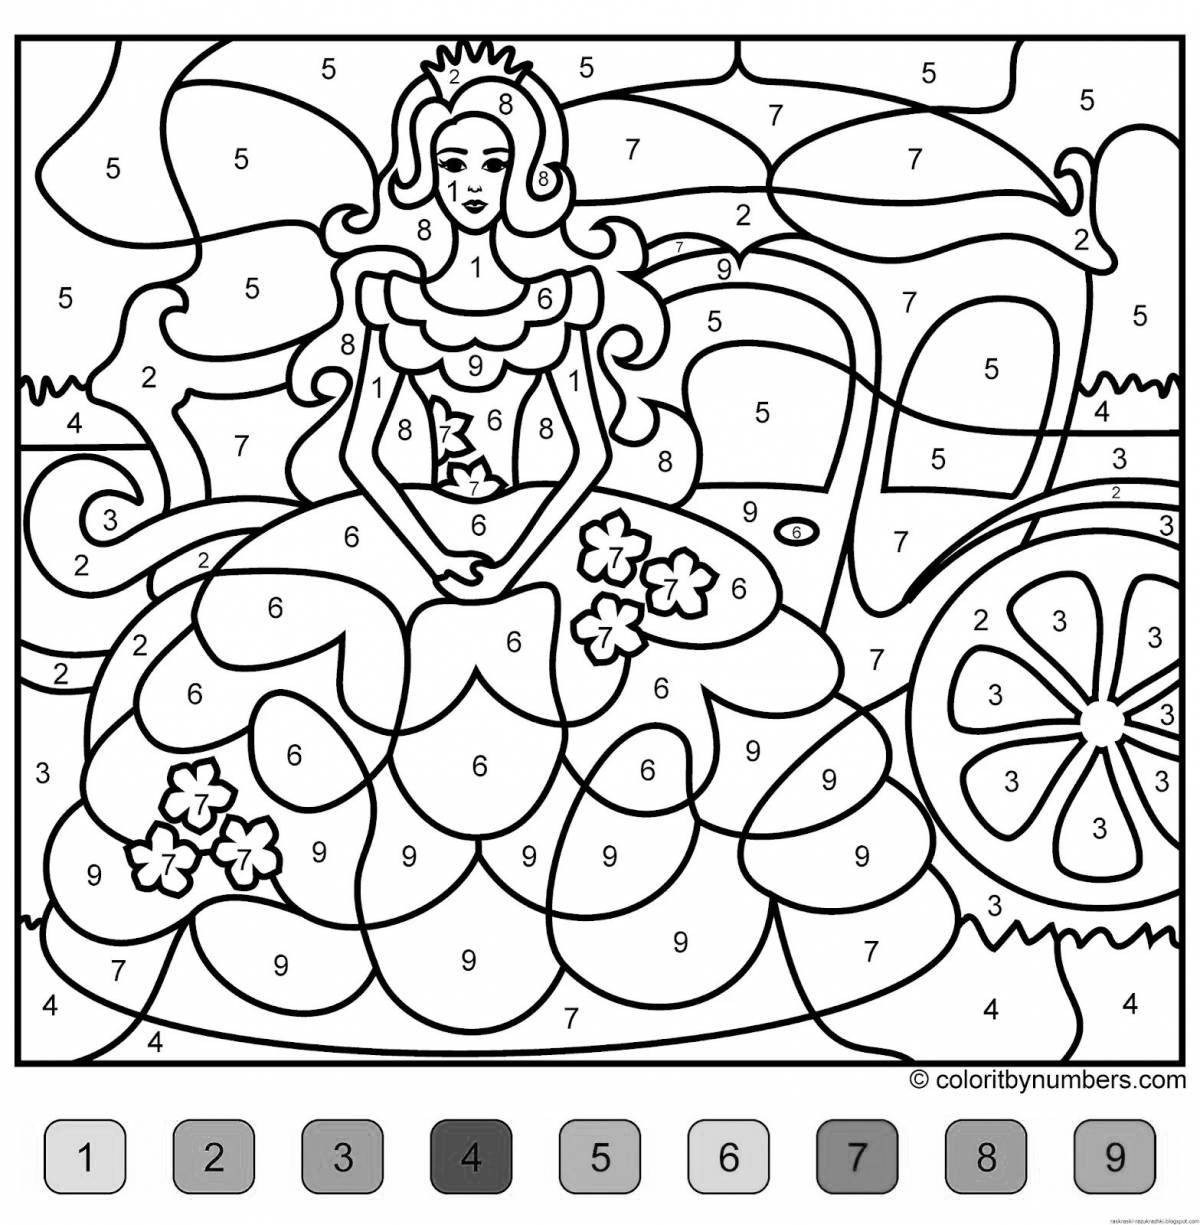 Live coloring in games for children 5 years old puzzles